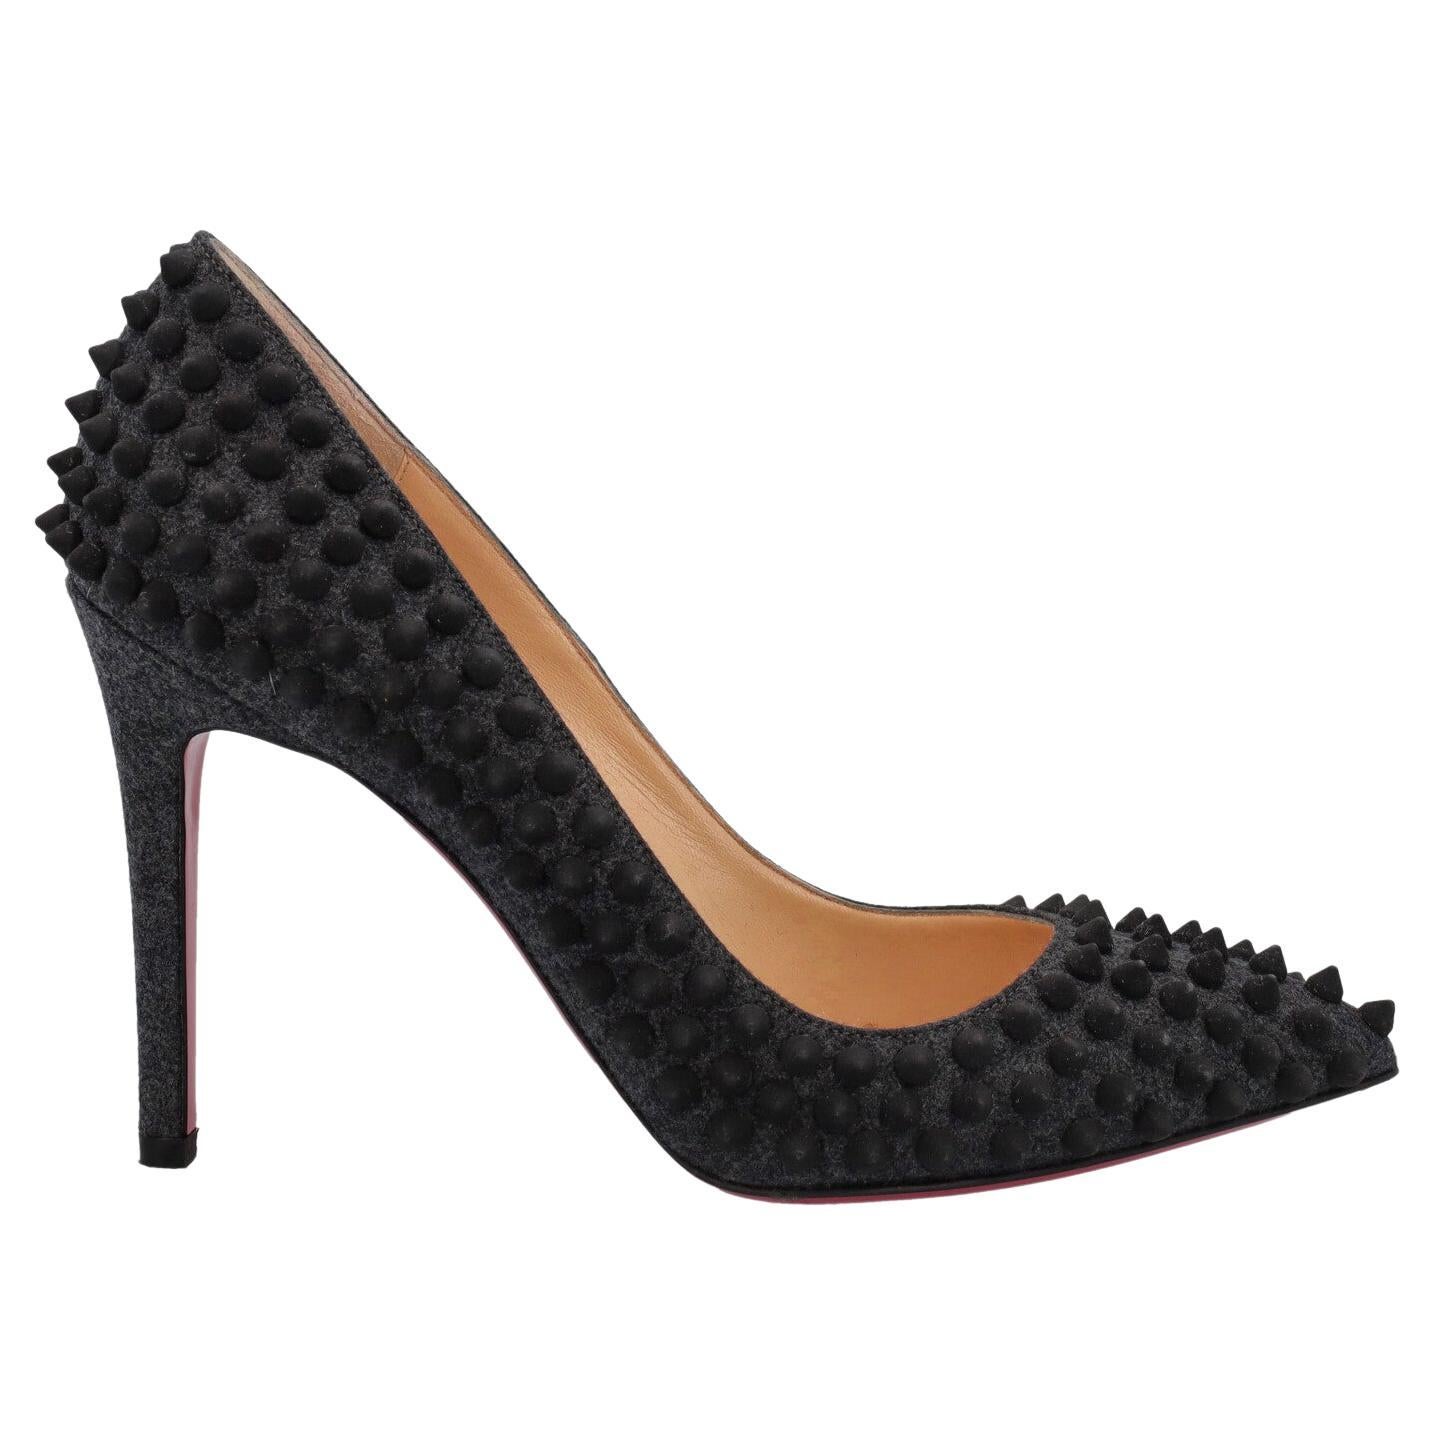 Christian Women Pumps Grey Fabric 36.5 For Sale at